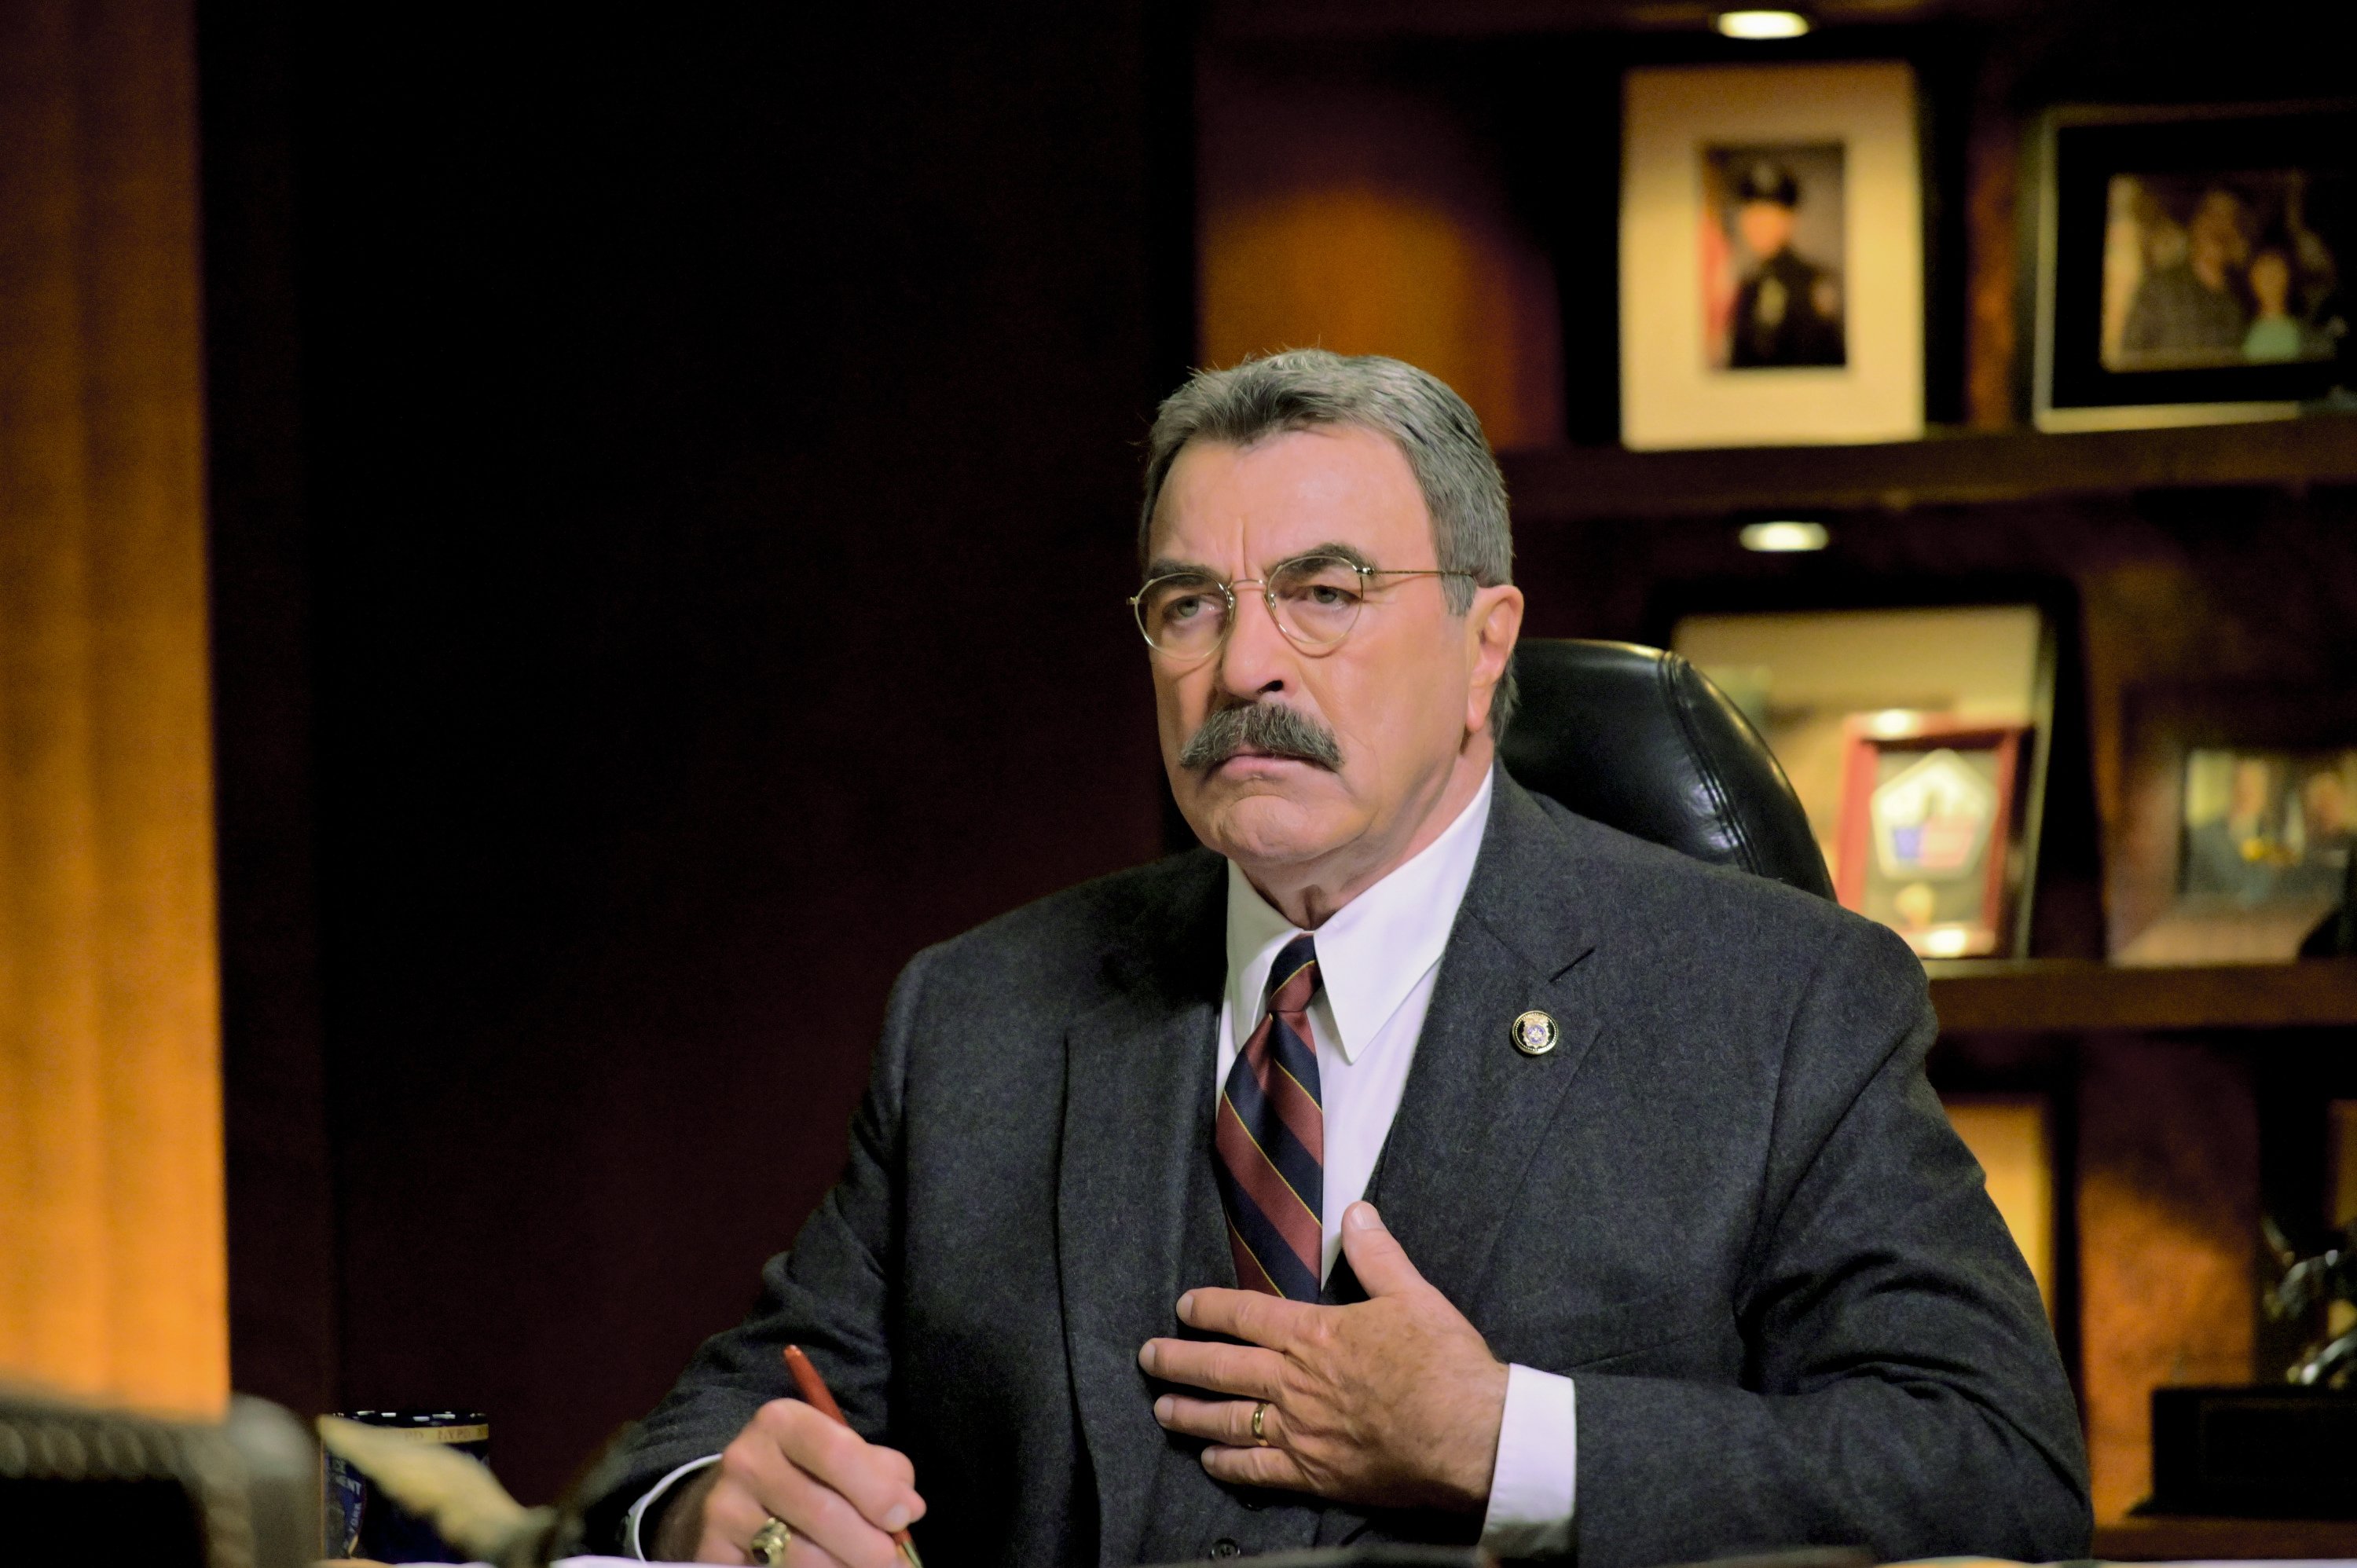 Tom Selleck on the set of "Blue Bloods" on July 30, 2021 | Source: Getty Images